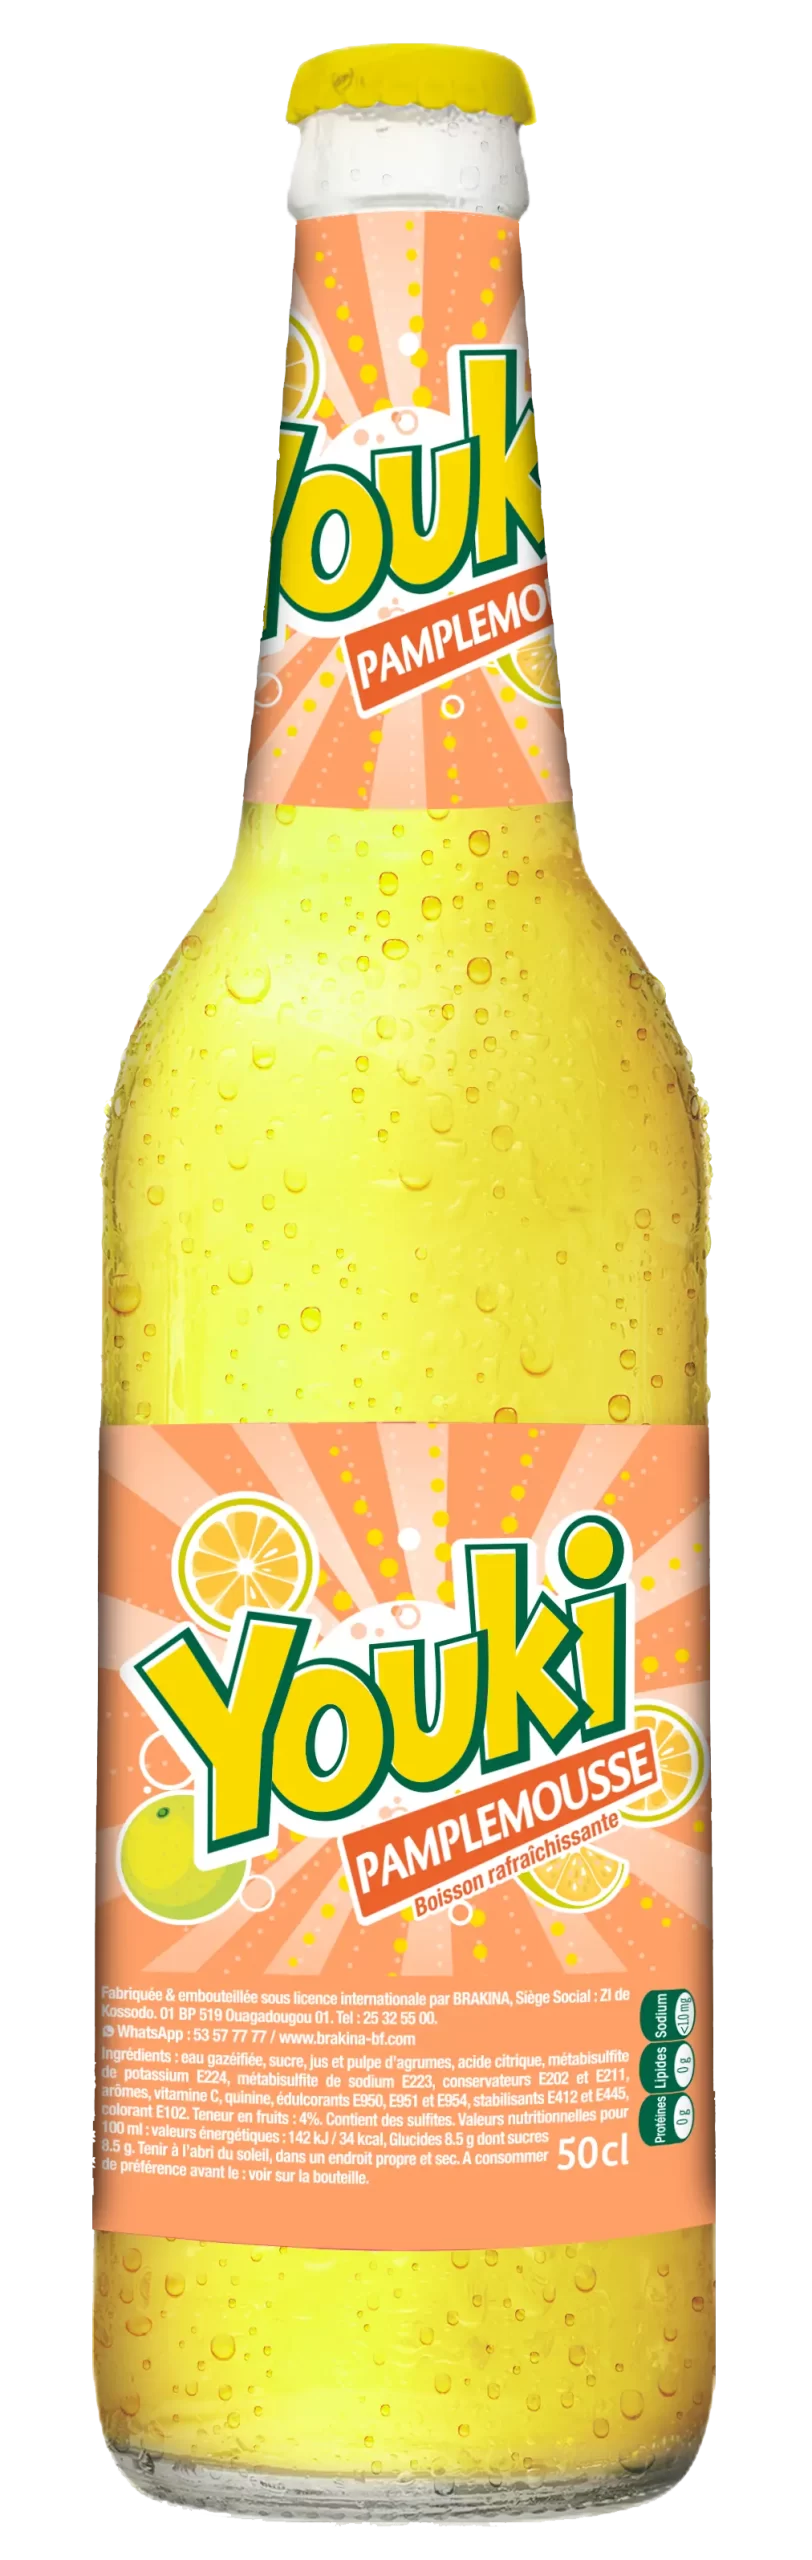 Bouteille Youki Pamplemousse